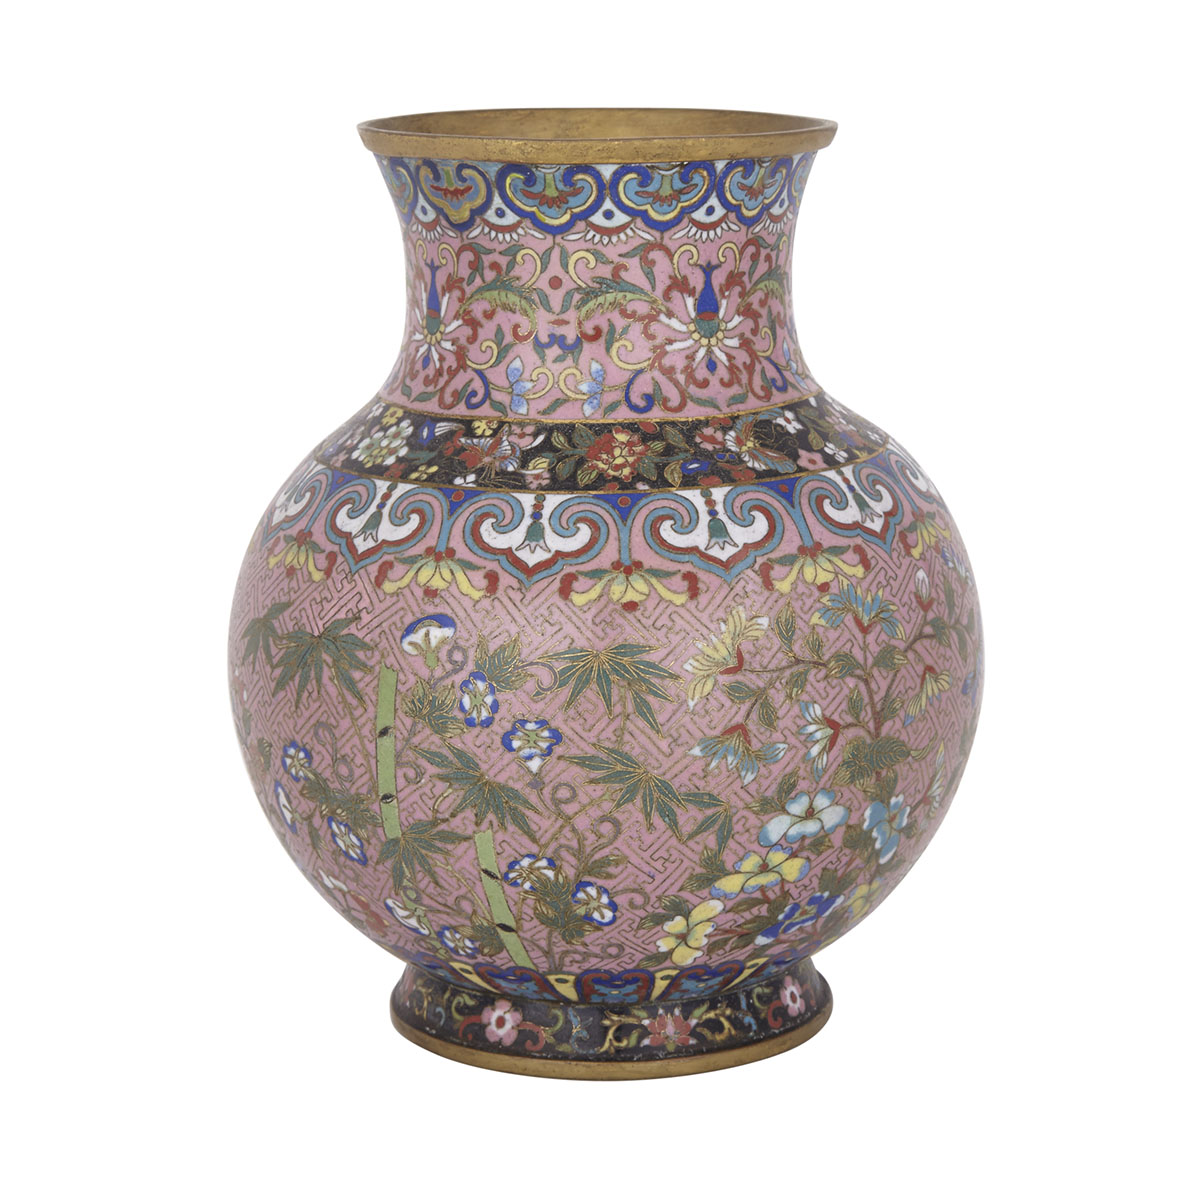 A Rare Chinese Pink-Ground Cloisonné  Medallion Vase, Late 19th Century